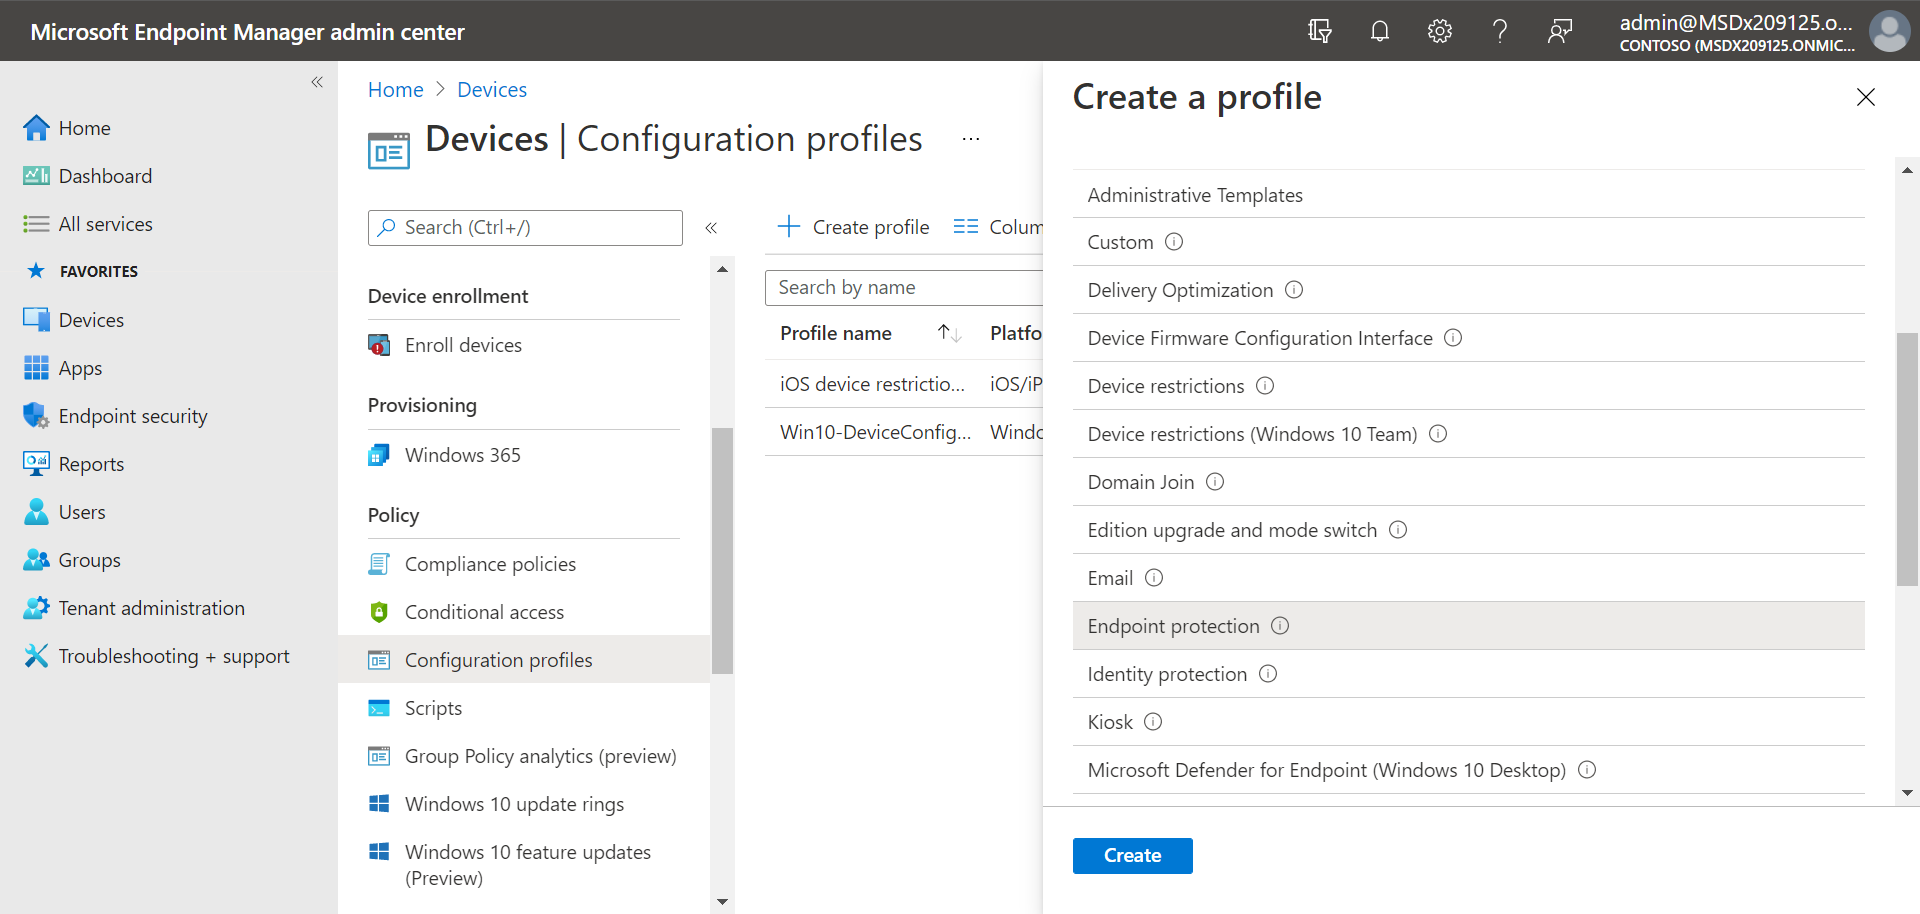 Endpoint protection profile in Microsoft Endpoint Manager